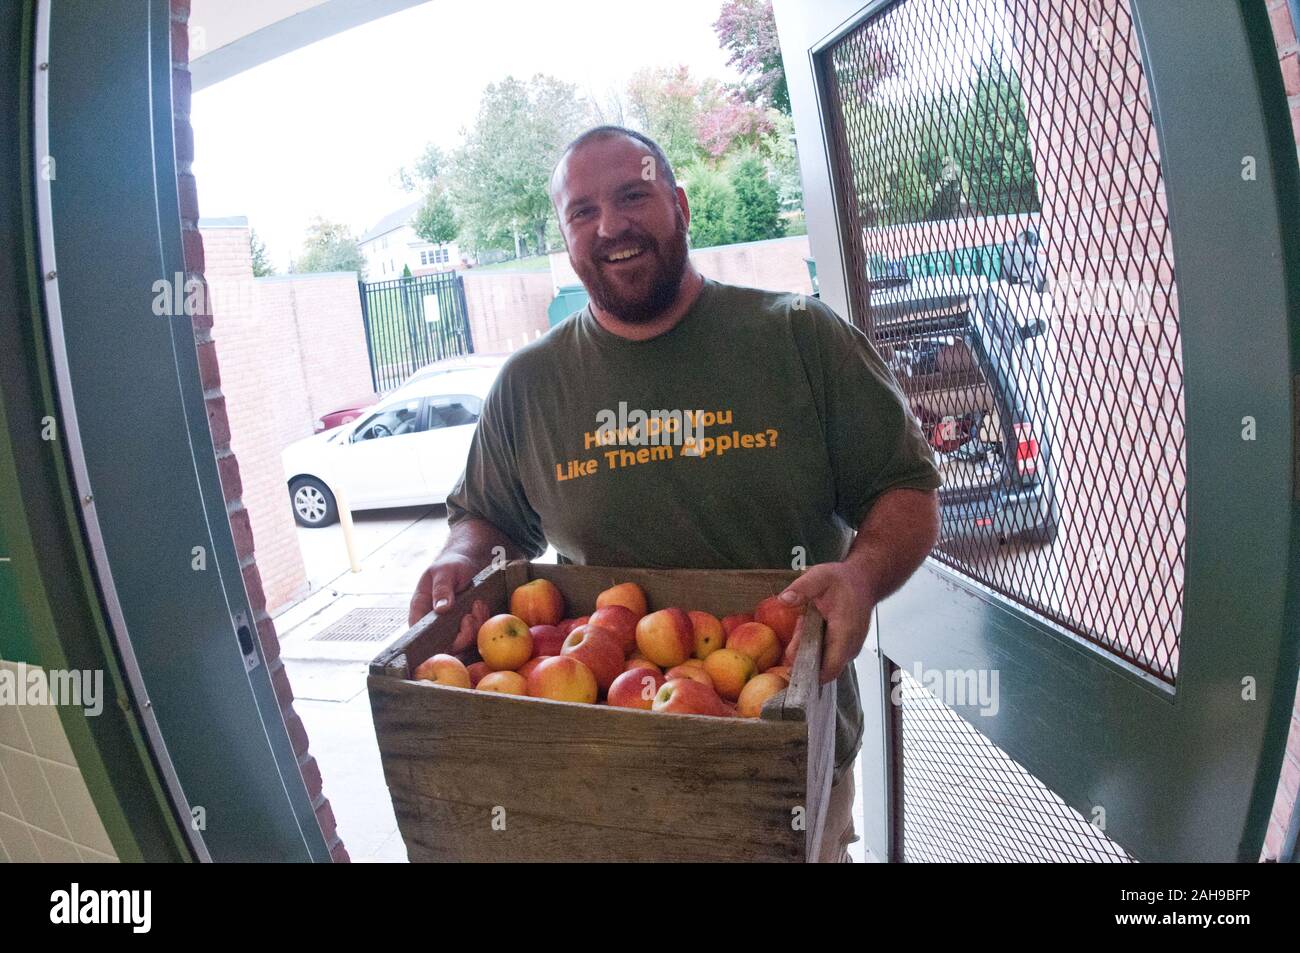 Bigg Riggs Farm owner Calvin Riggleman brought three varieties of apples in several crates to Nottingham Elementary School in Arlington, VA, for a National School Lunch Week event on Wednesday, October 12, 2011. Farmers from Bigg Riggs Farm in Hampshire County, WV, and Maple Avenue Market Farm in Vienna, VA were very popular with the students. Today's menu included roasted chicken, roasted butternut squash with dried cranberries, farm fresh mixed lettuce salad, turkey wraps, pita wedges, hot muffins, carrots, asian pears and more. Stock Photo